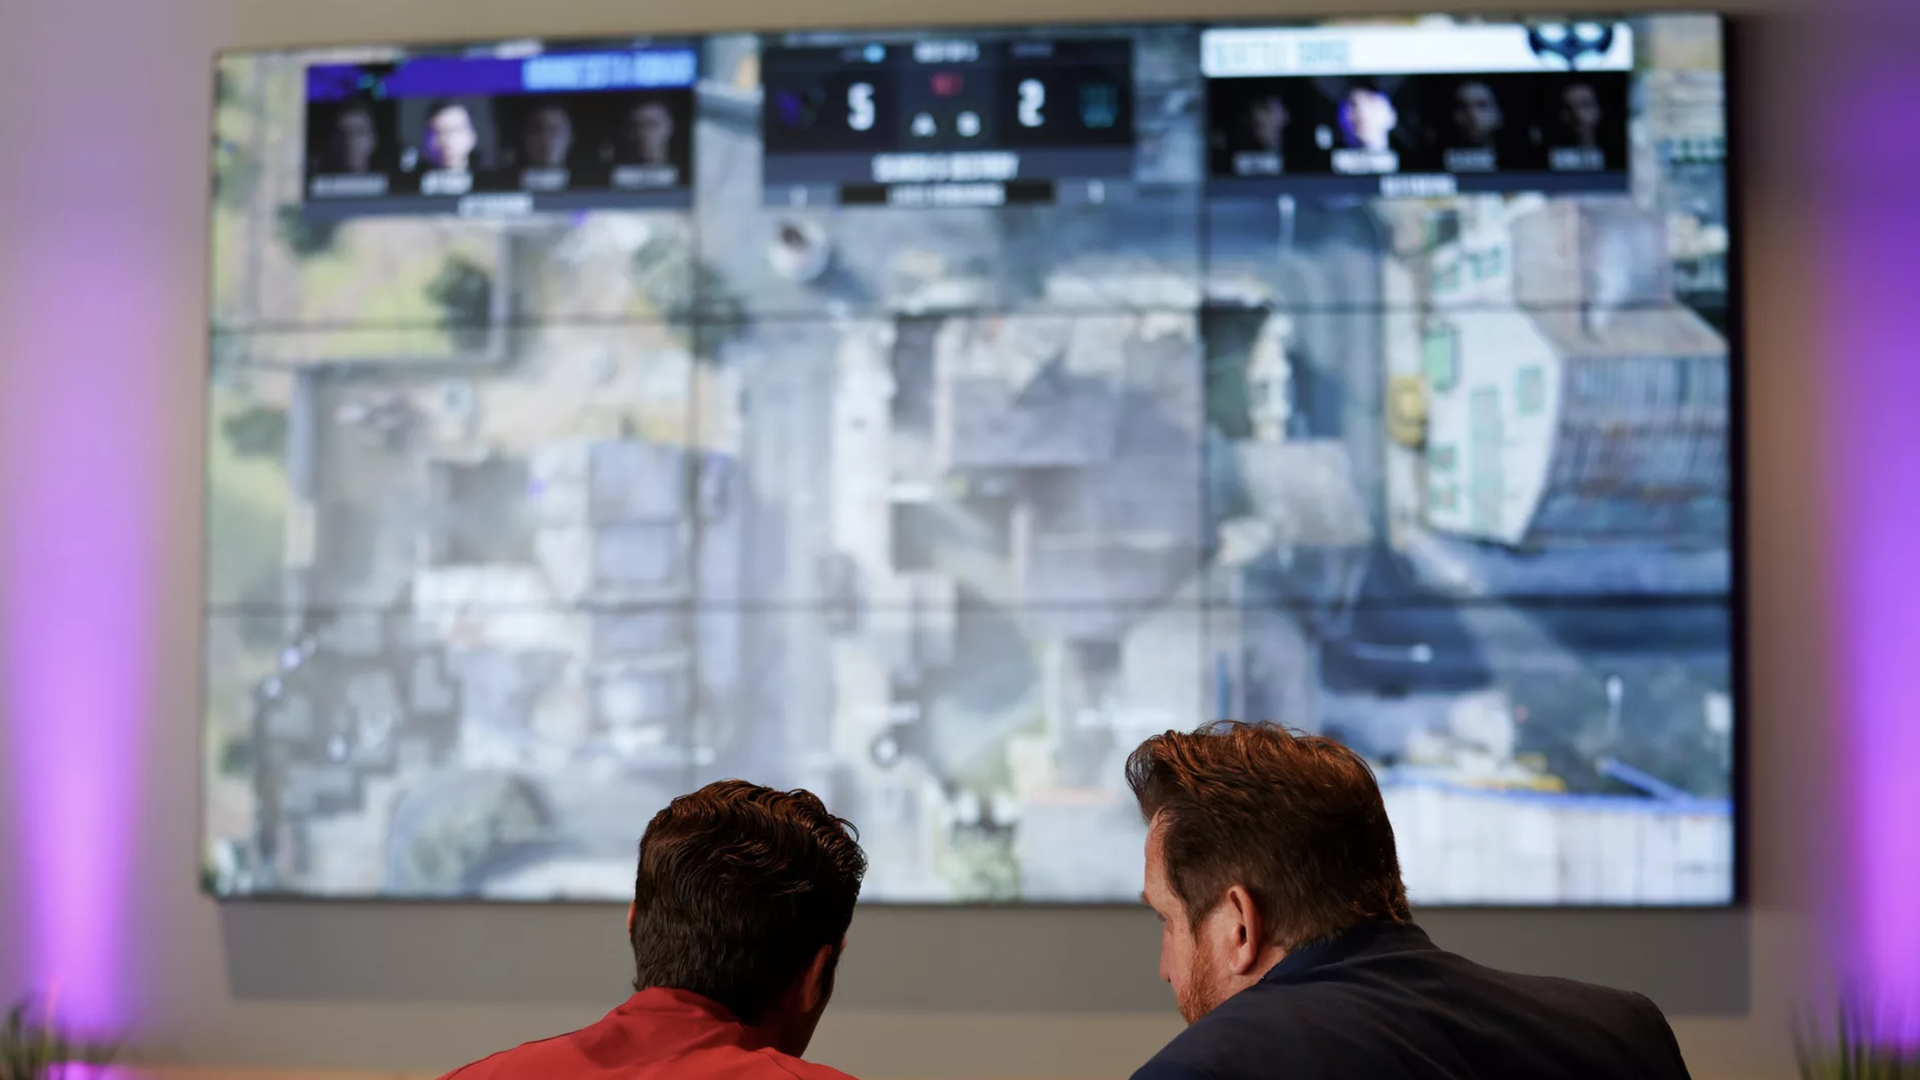 Photograph of two people looking at a big-screen projection of a Call of Duty level